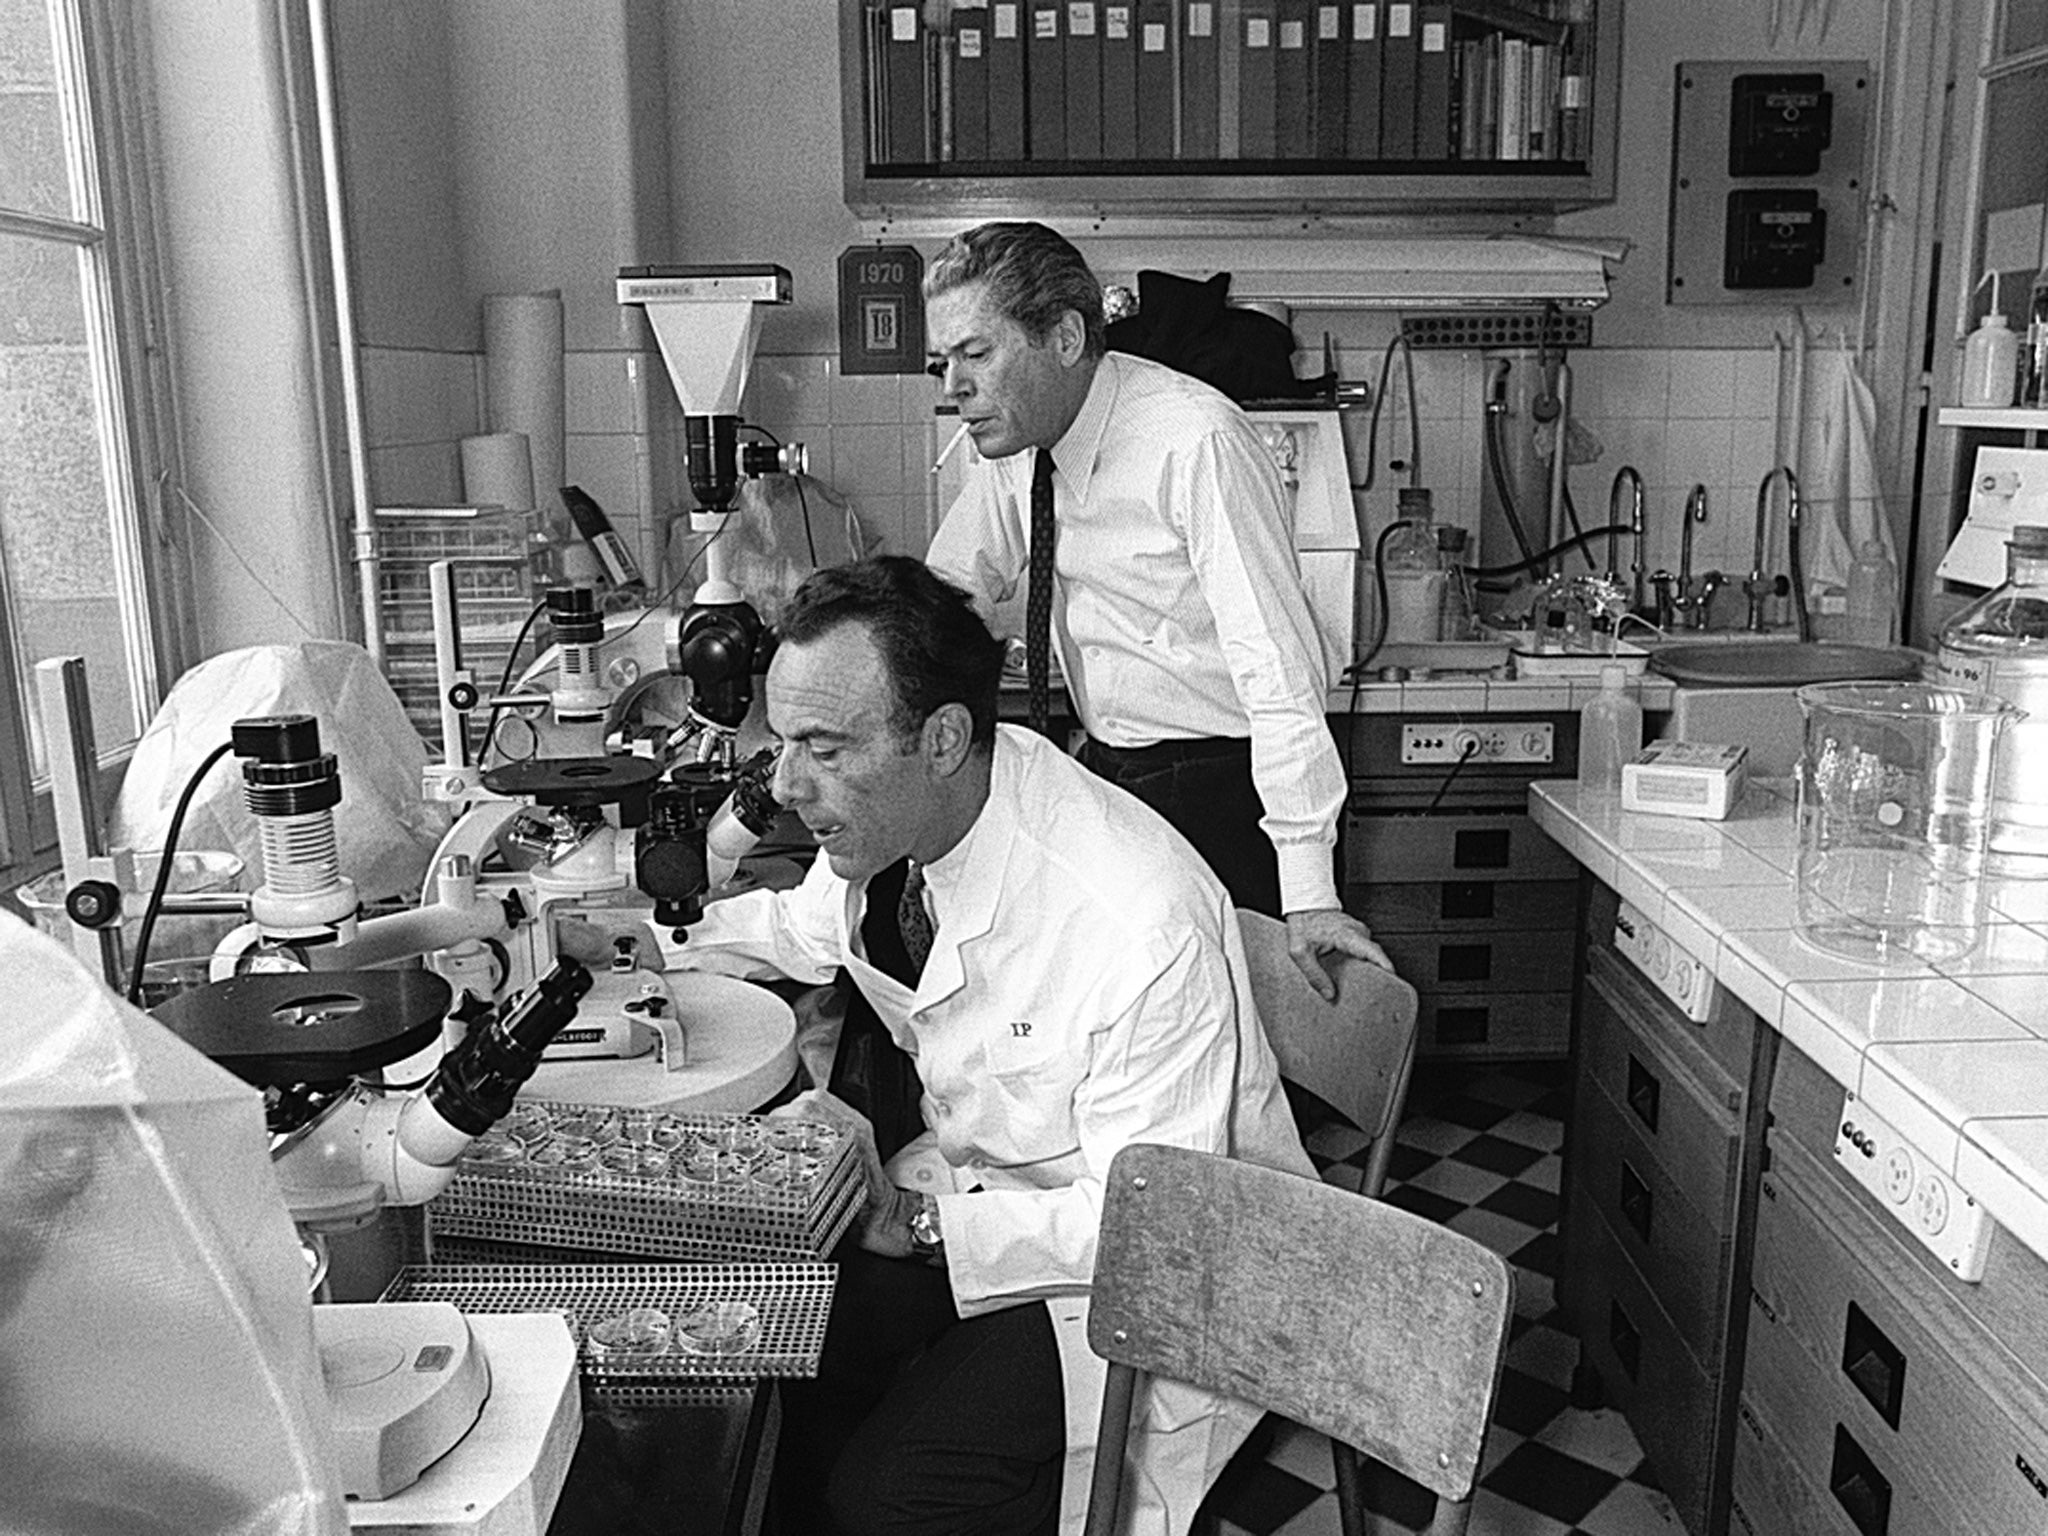 Jacob, foreground, and Jacques Monod in ther lab at the Pasteur Institute in Paris in 1971